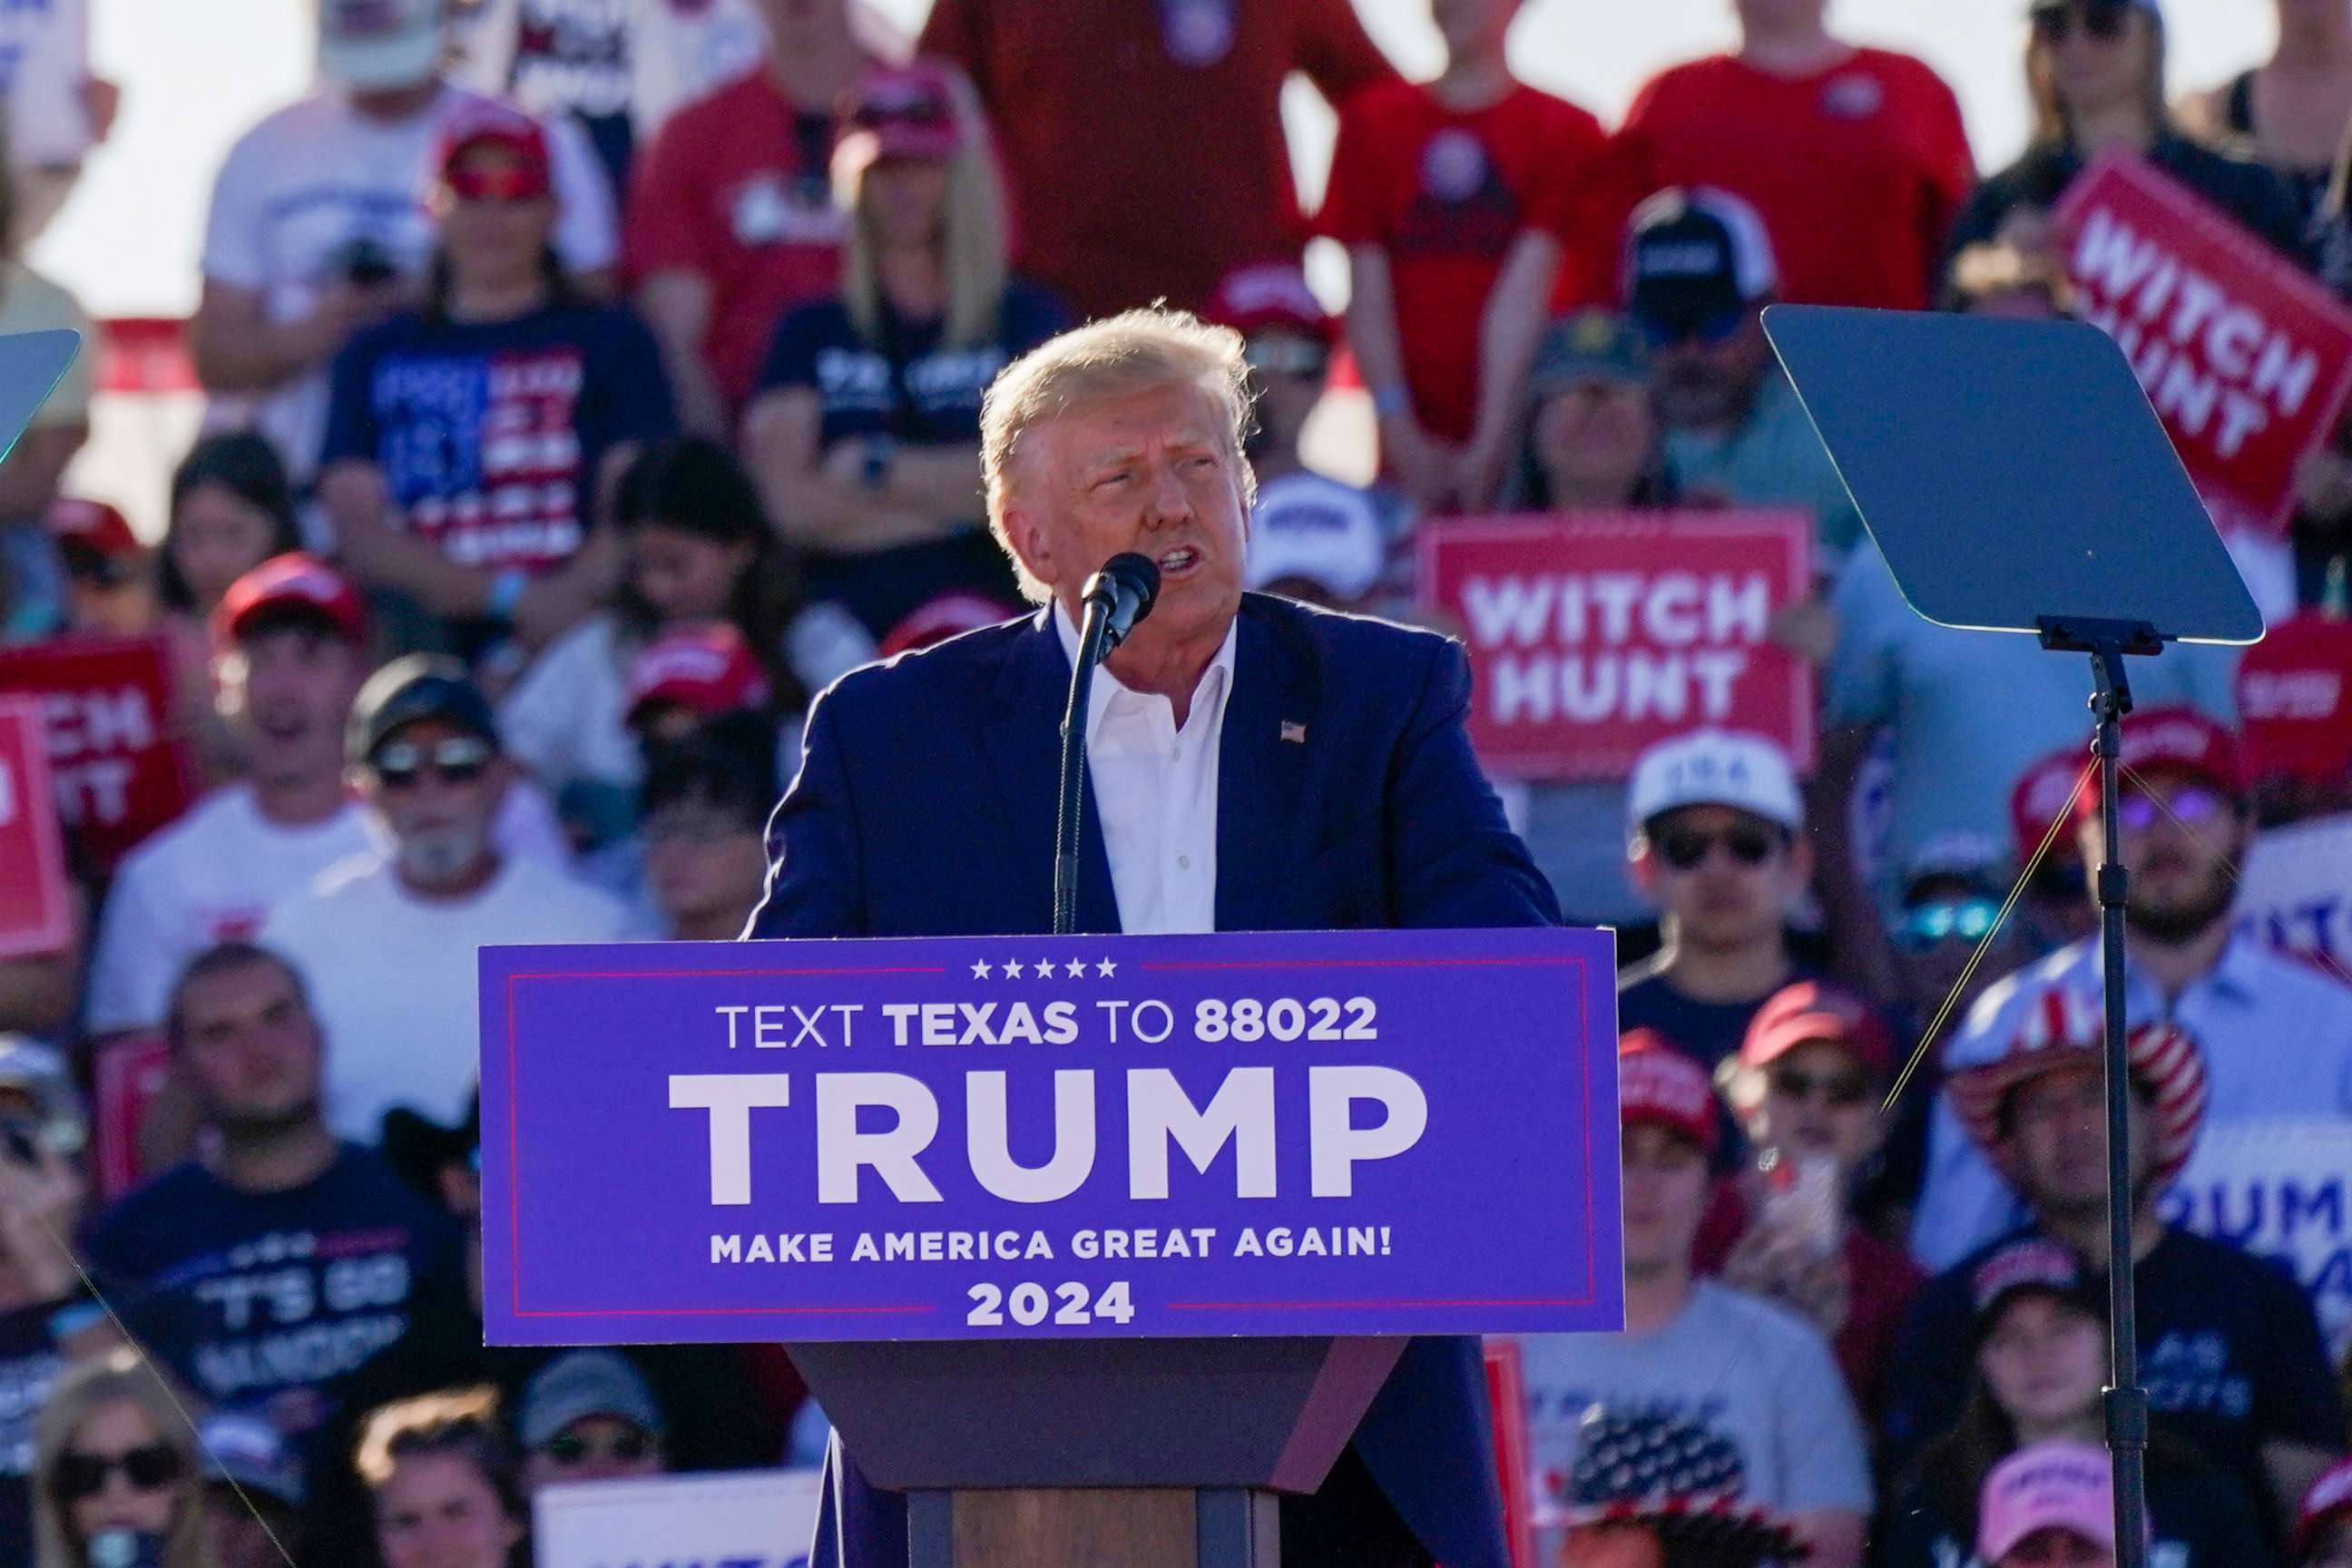 PHOTO: Former President Donald Trump speaks at a campaign rally at Waco Regional Airport, Mar. 25, 2023, in Waco, Texas.